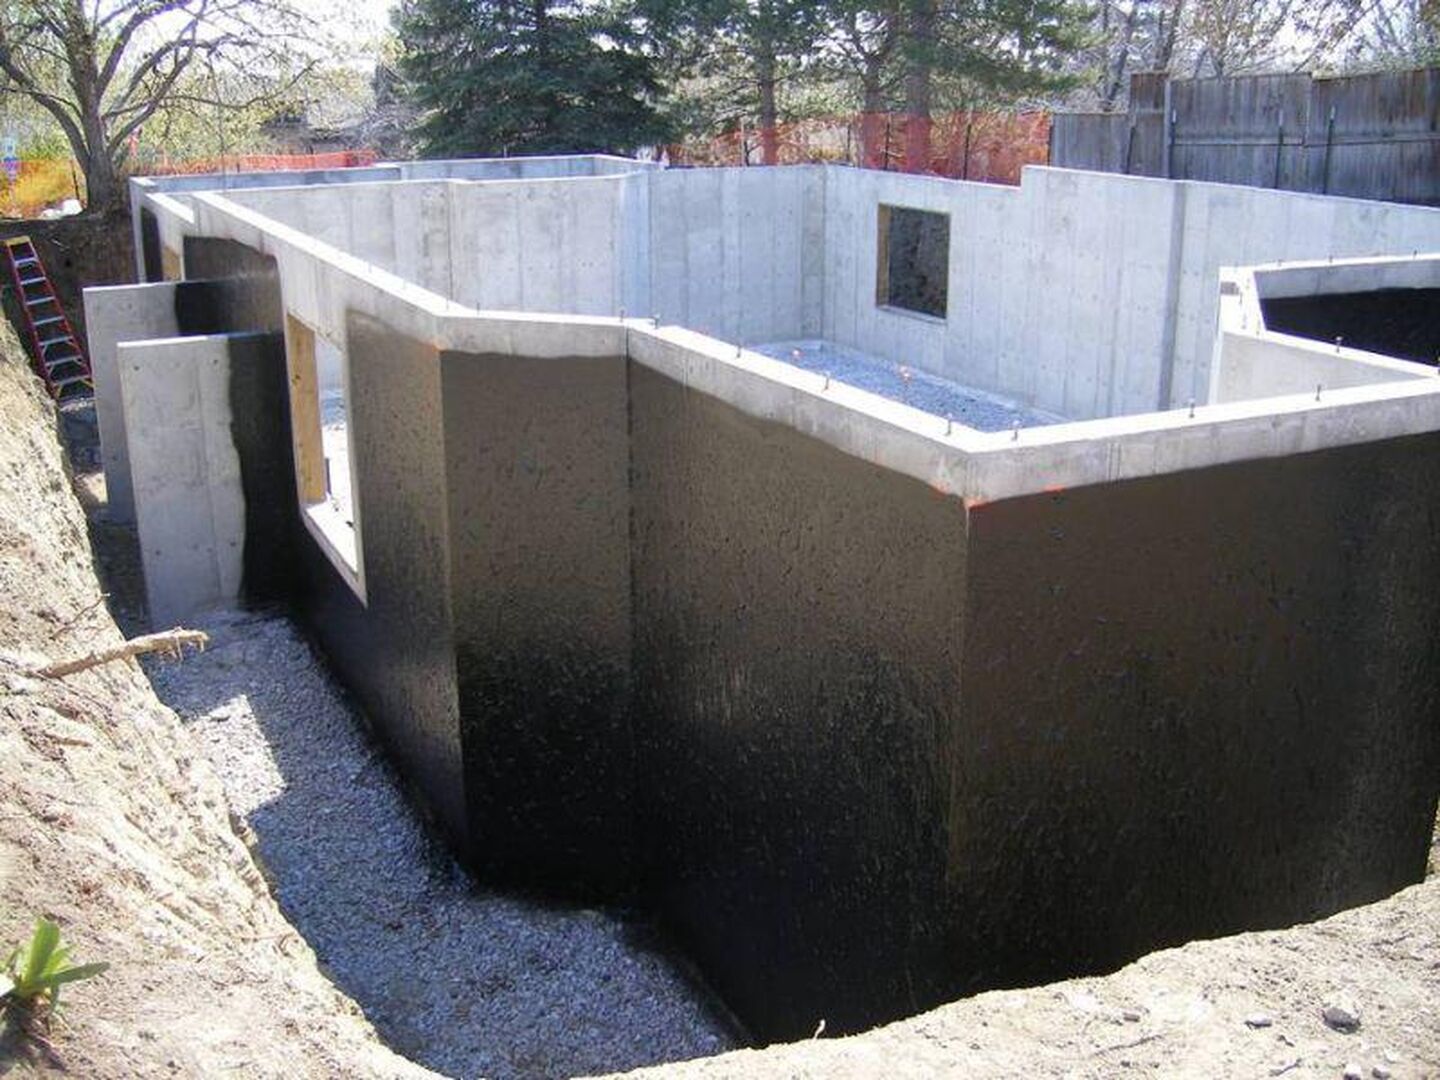 Modern basement waterproofing techniques being applied in a residential home in Medina, Ohio, to prevent water damage and mold growth